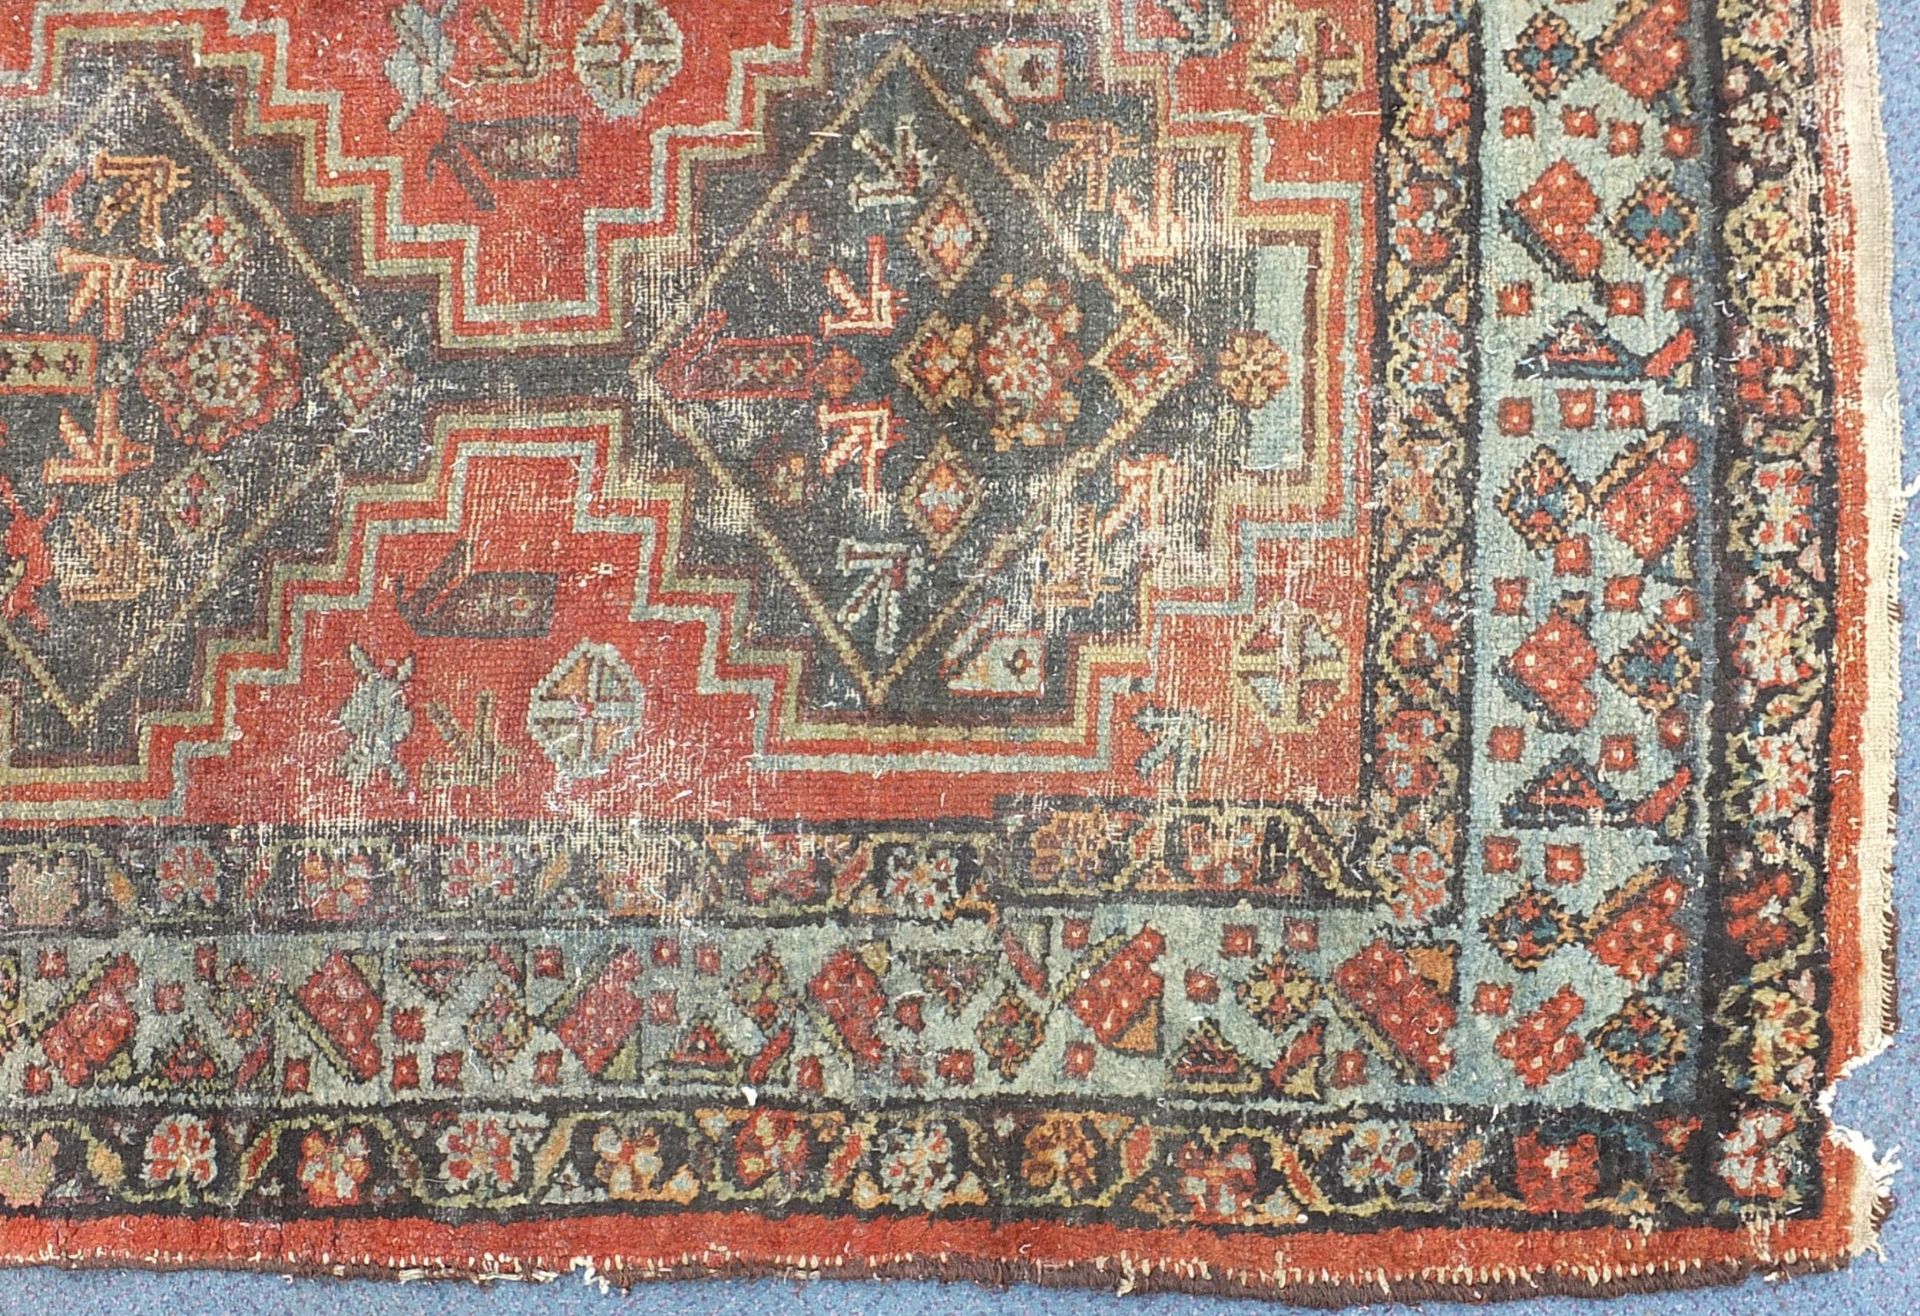 Rectangular red and blue ground rug having an all over geometric design, 190cm x 108cm - Image 5 of 6